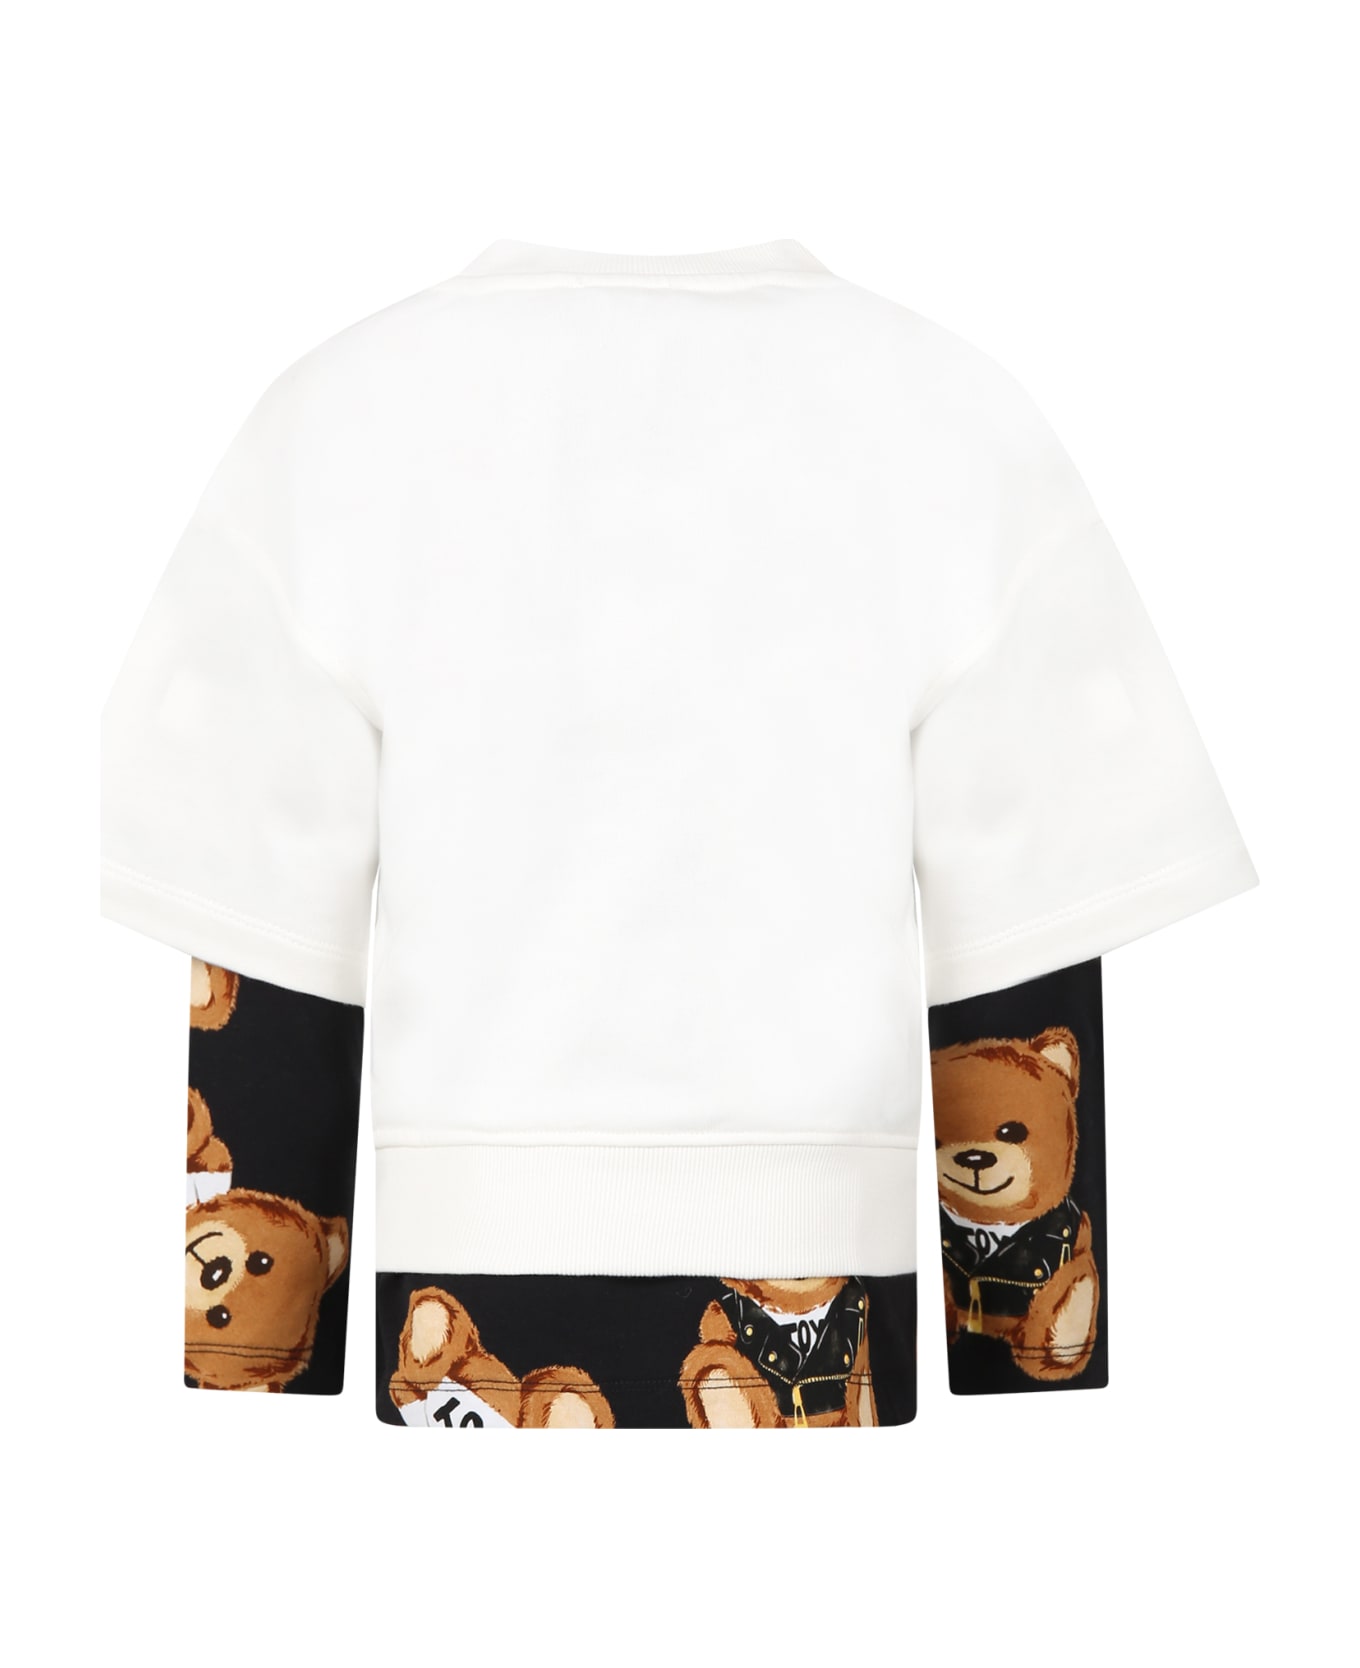 Moschino Multicolor Set For Kids With Teddy Bear And Logo - Multicolor